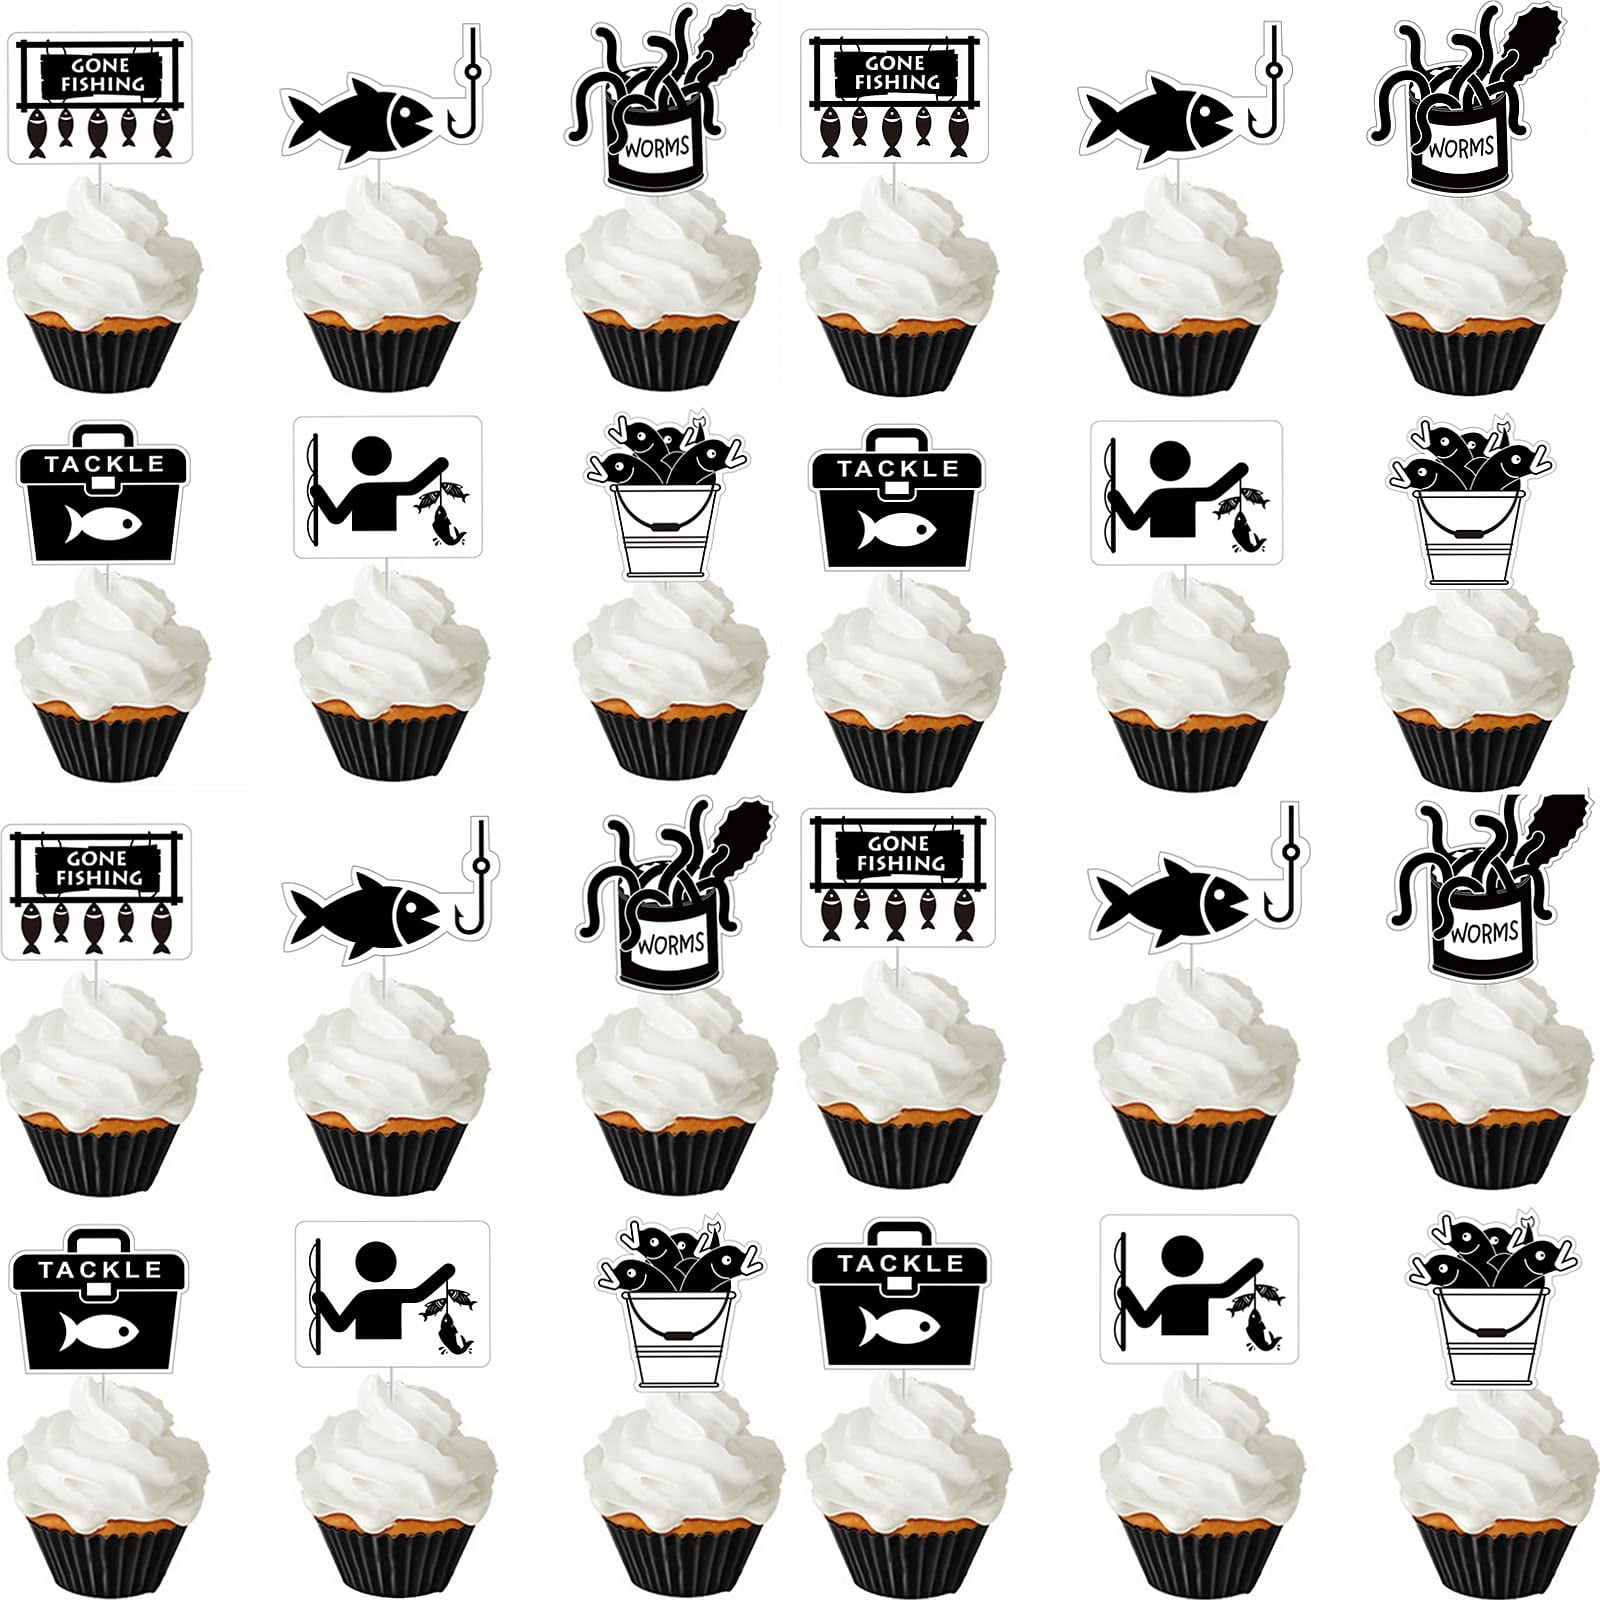 24Pcs Gone Fishing Cupcake Toppers Little Fisherman Theme Party